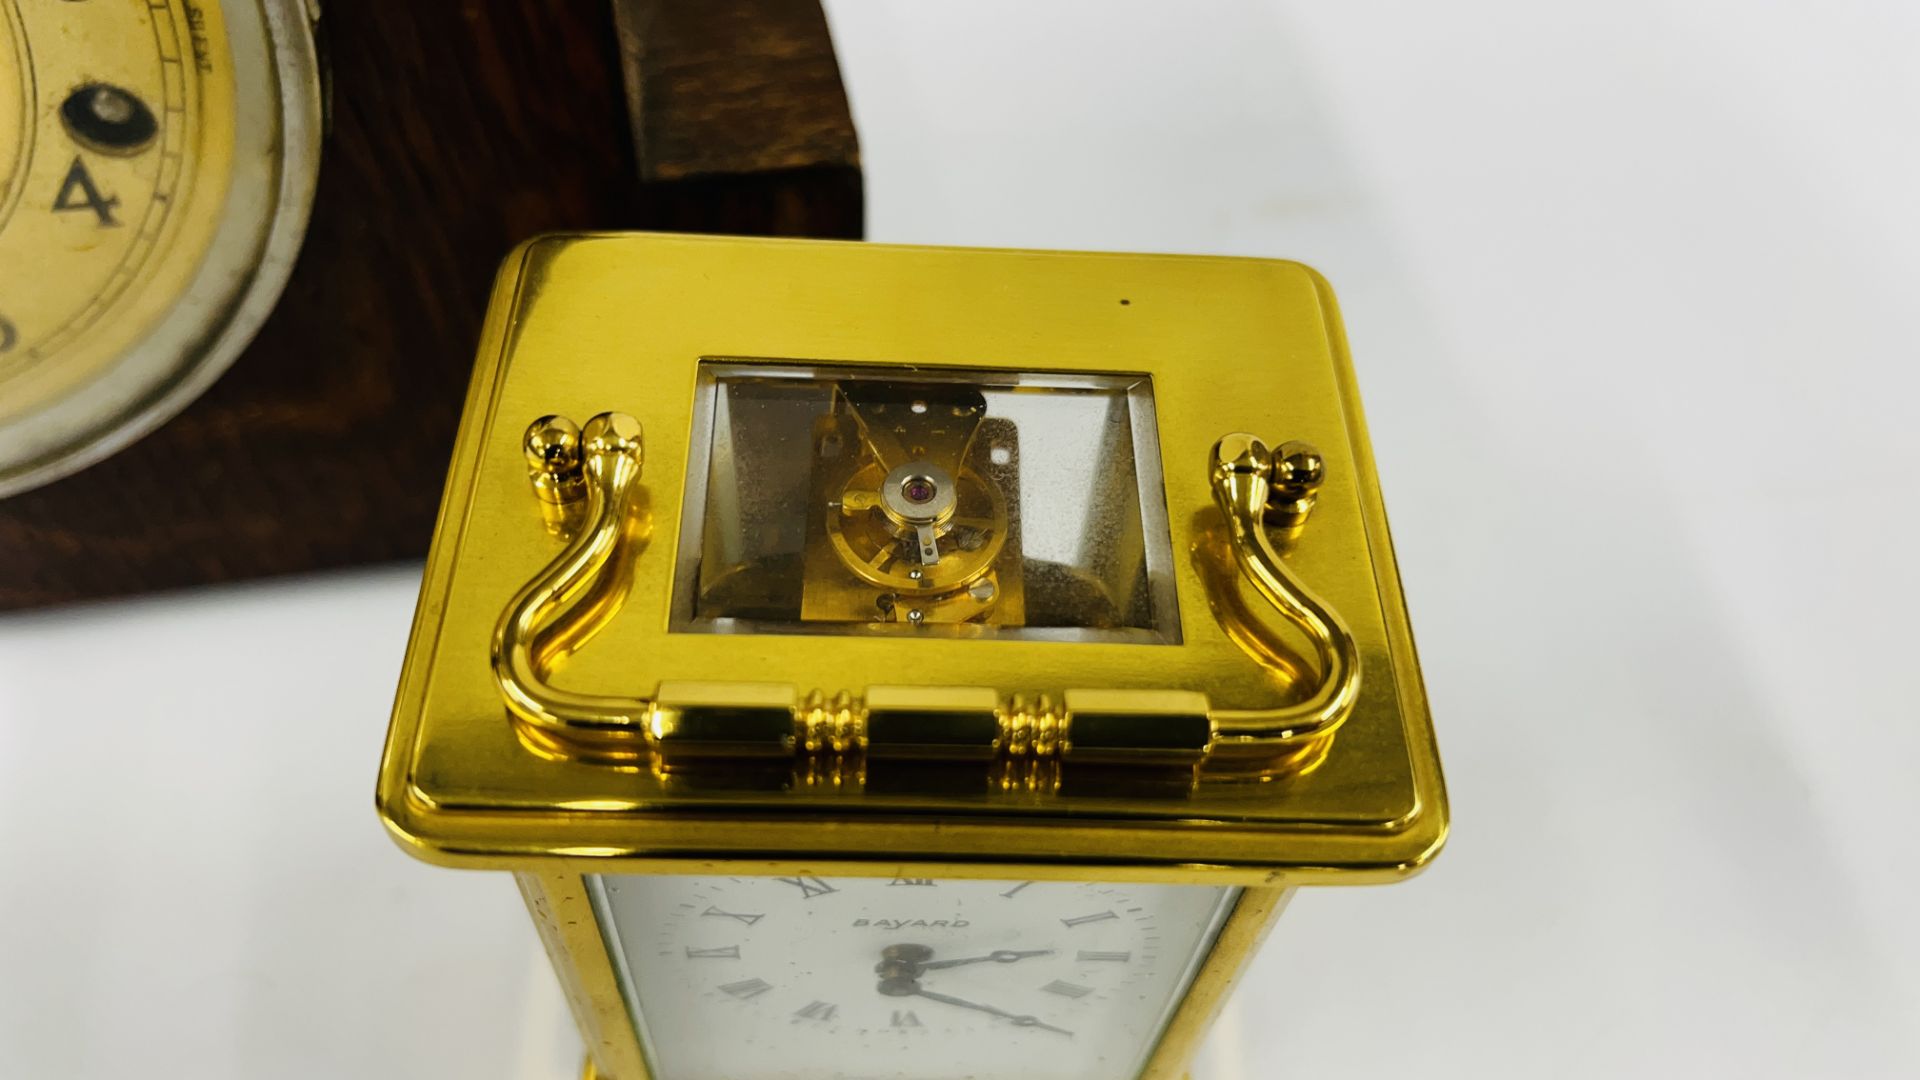 A GARROD 8 DAY MANTEL CLOCK ALONG WITH AN 8 DAY CARRIAGE CLOCK. - Image 3 of 7